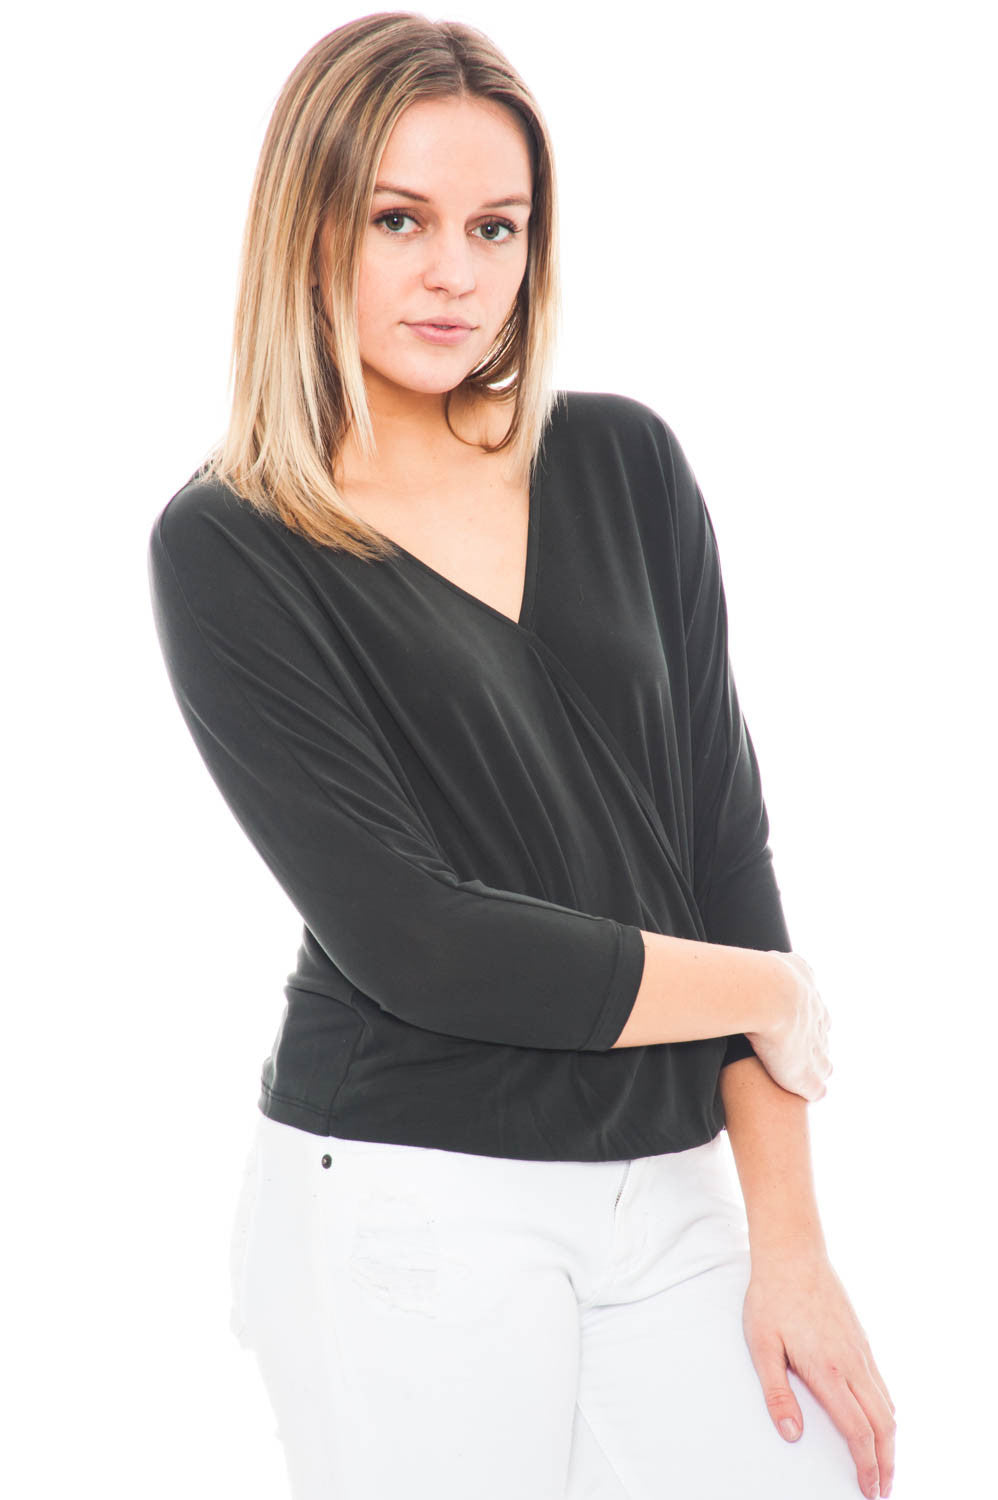 Shirt - 3/4 Sleeve Top with an Overlap Front by Everly